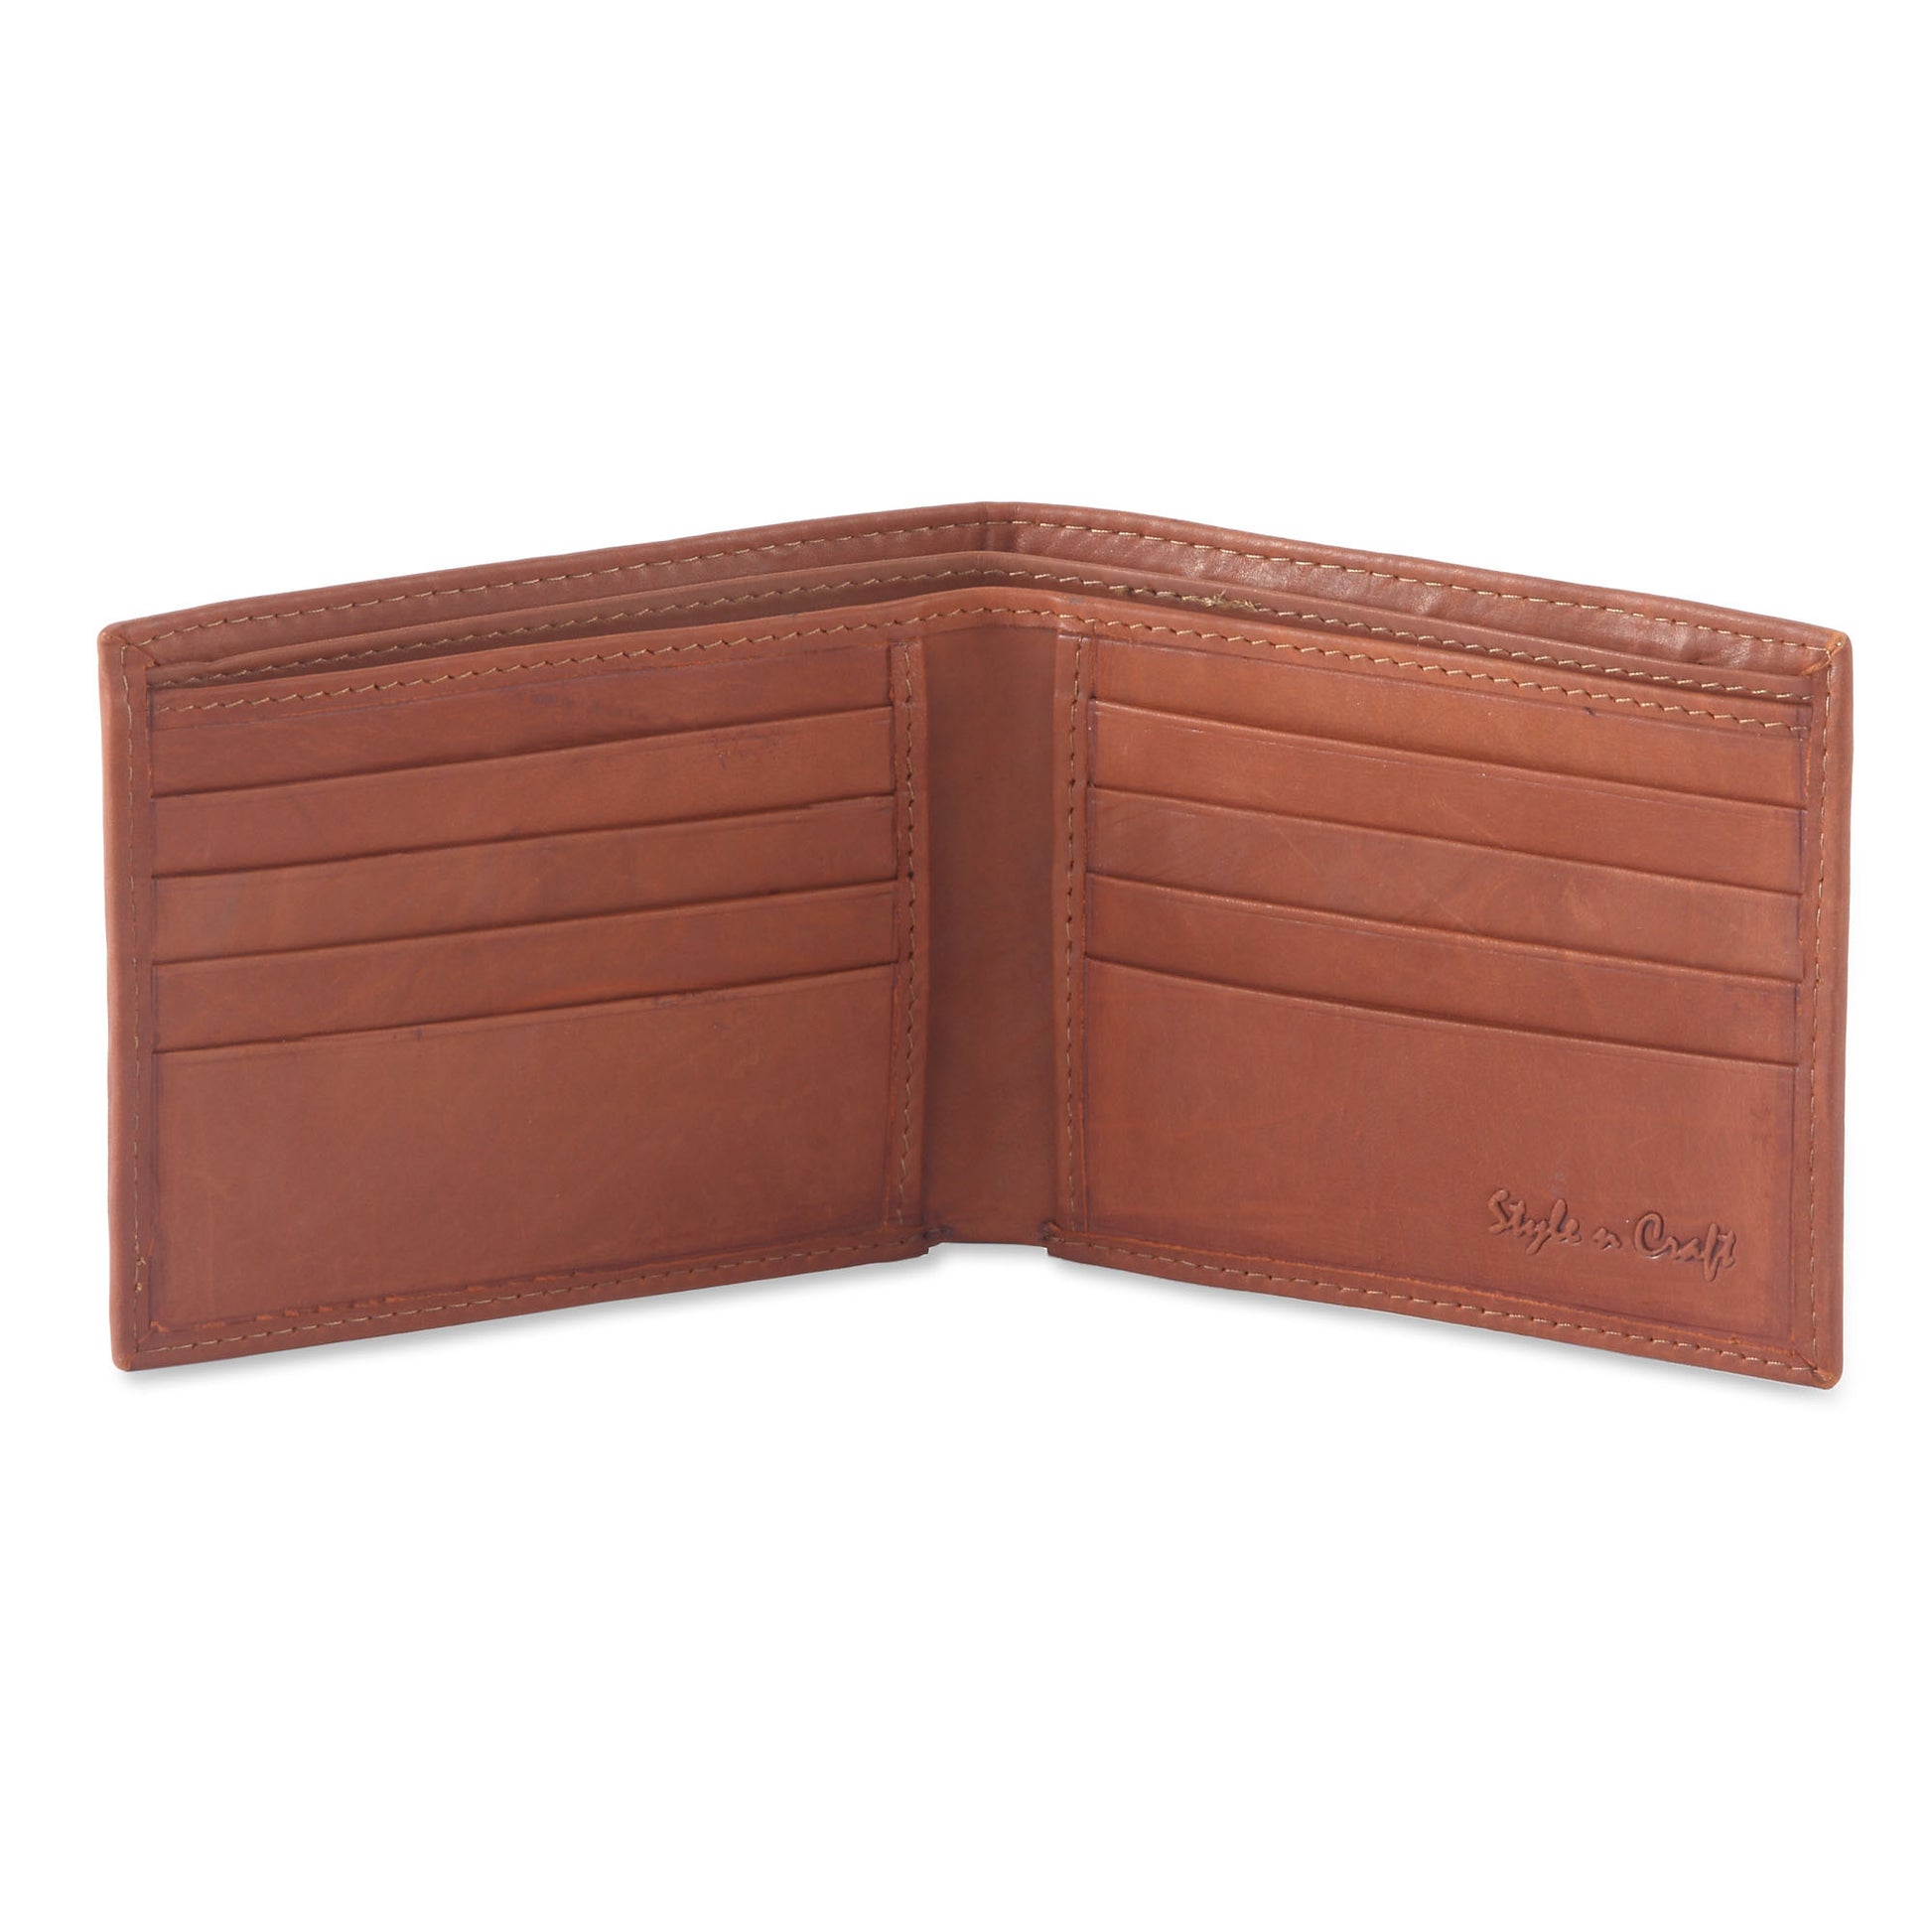 Style n Craft 200160 - slim bifold wallet in tan color leather - open view